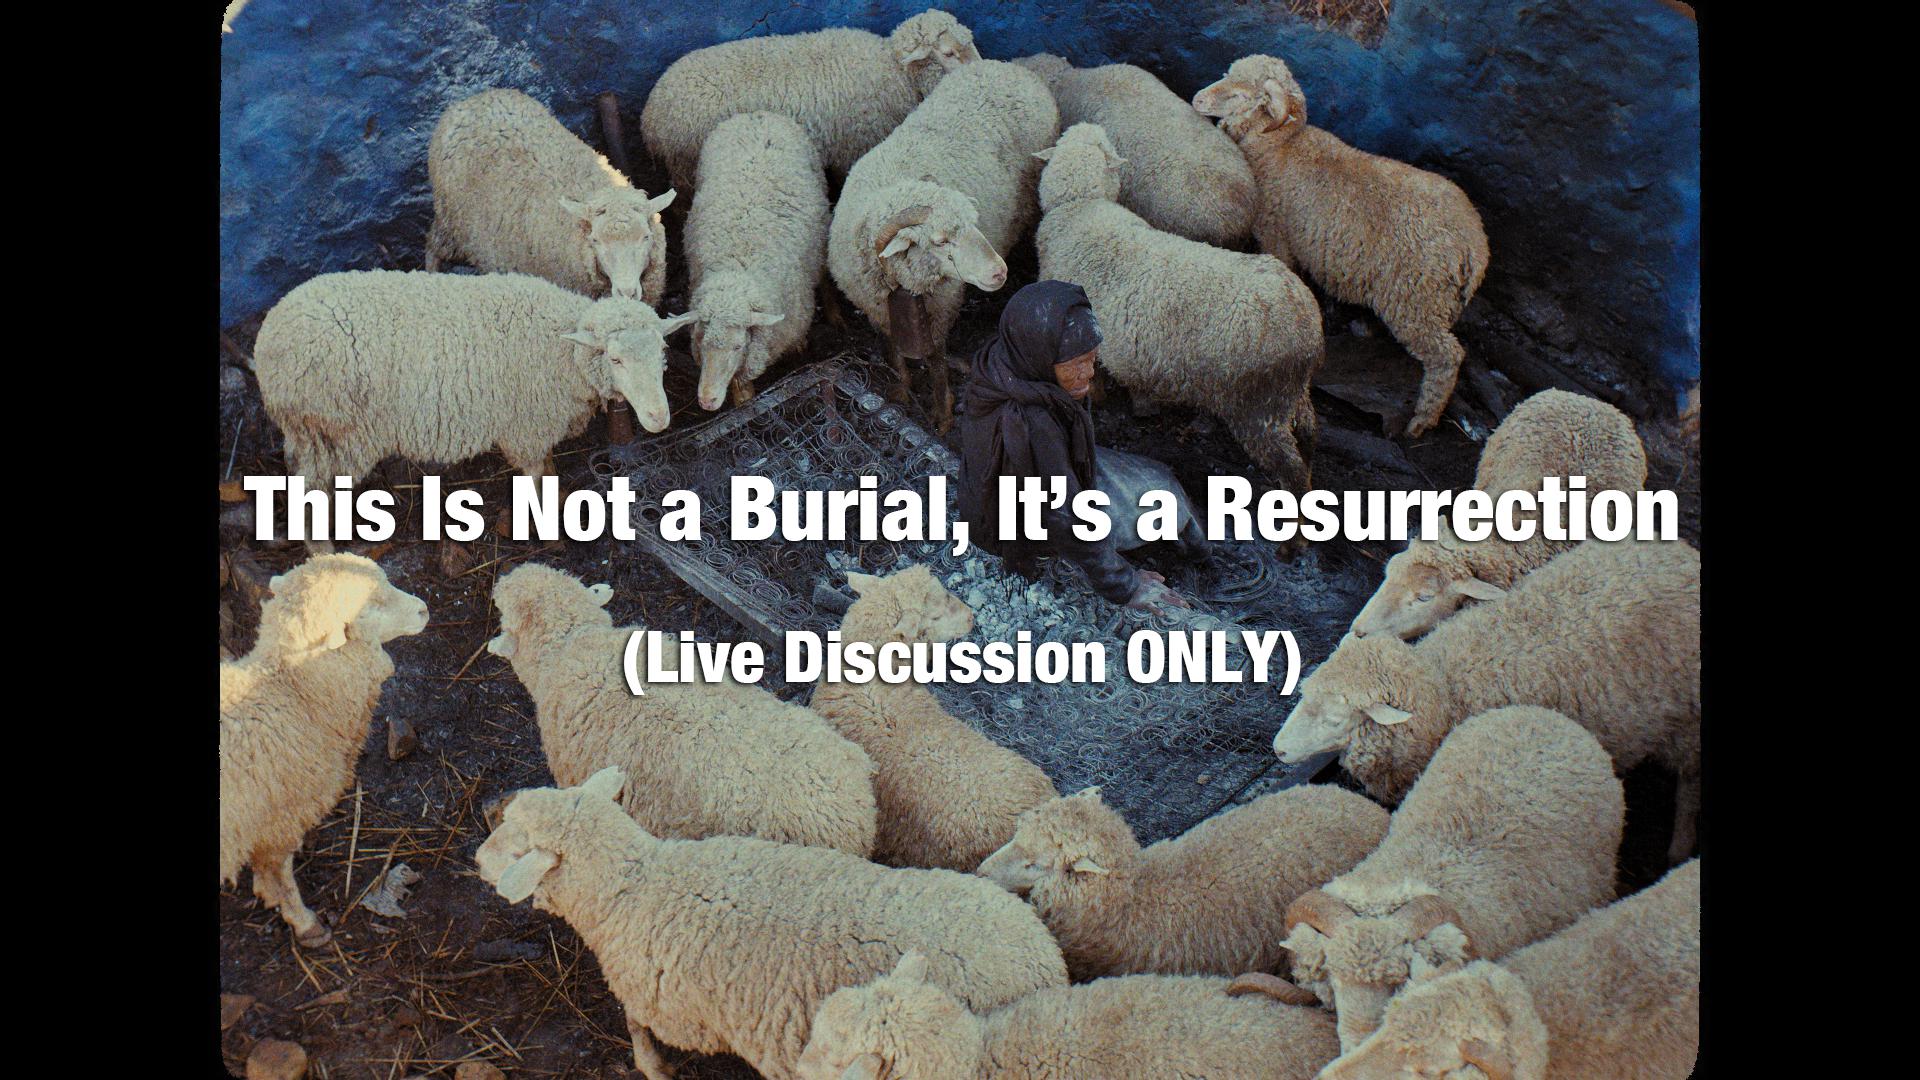 This Is Not A Burial, It's A Resurrection Live Discussion with Director Lemohang Jeremiah Mosese [FREE LIVE DISCUSSION ONLY]